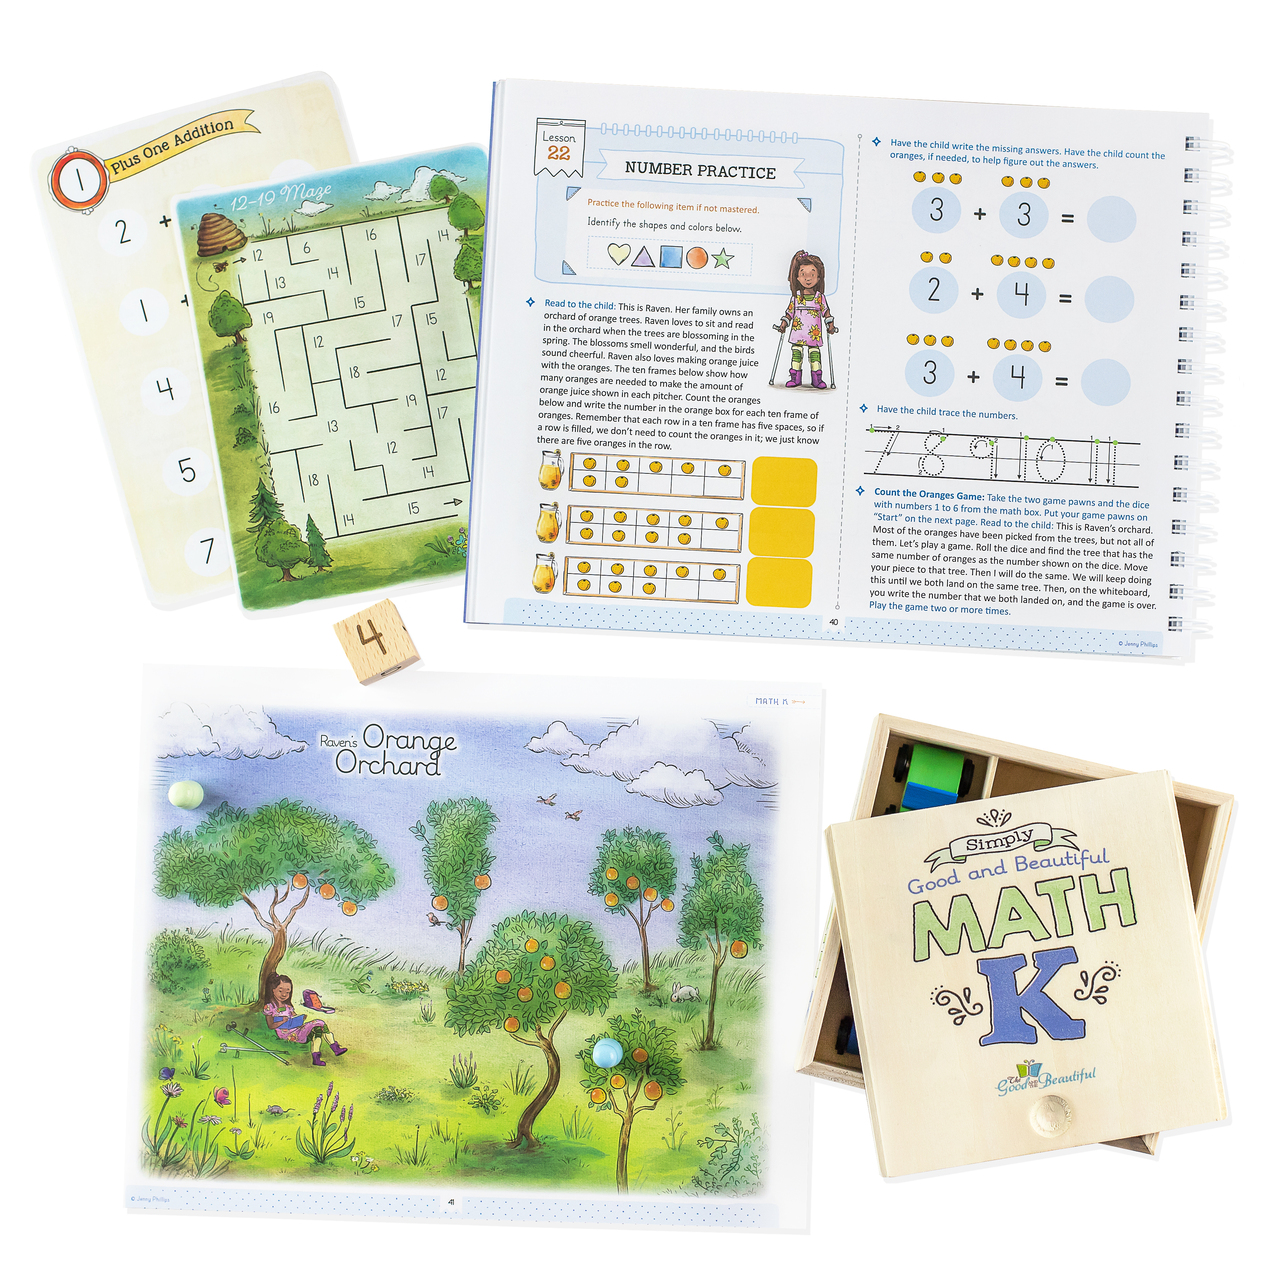 Sample of Math K Course Book and Box